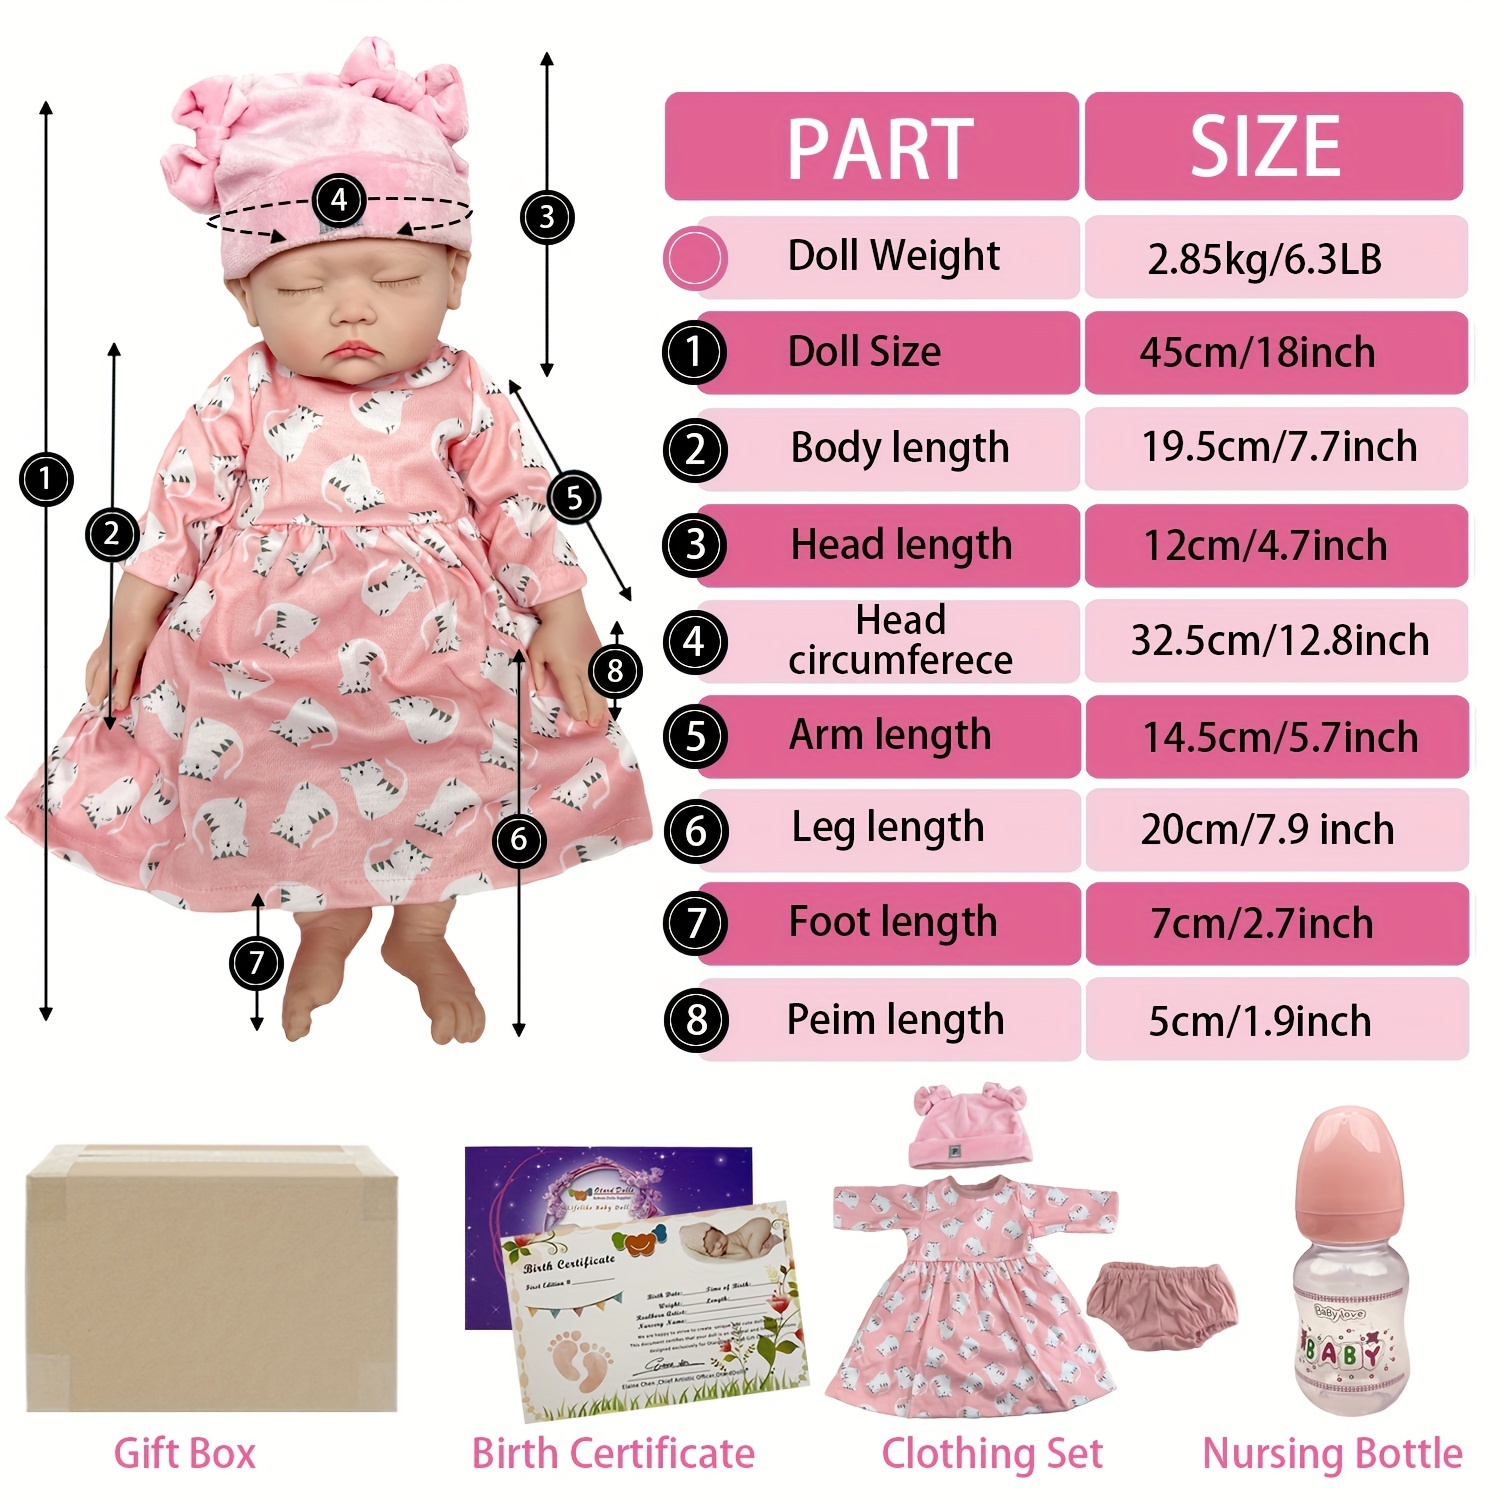 17.72inch Sleeping Girl Silicone Reborn Dolls Full Body Soft Solid Silicone  Bebe Reborn Doll Artist Painting Baby Dolls For Family's Gift Corpo De Sil